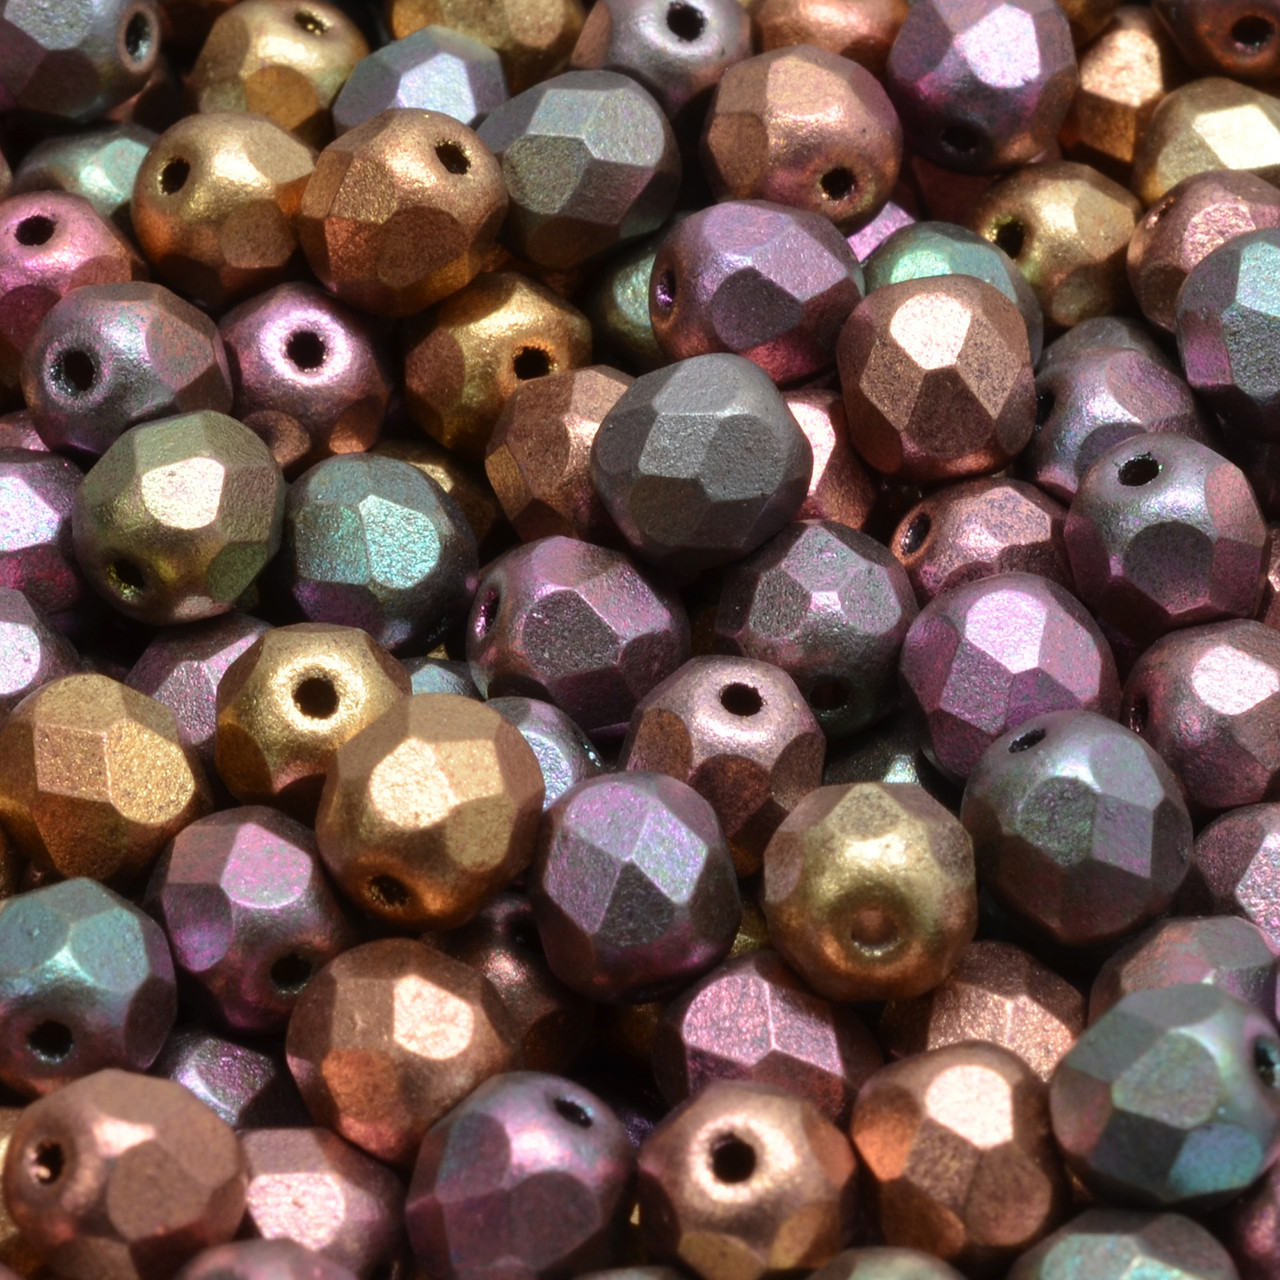 100 Czech 6mm Pressed Glass Round Beads Apollo Gold (27101)